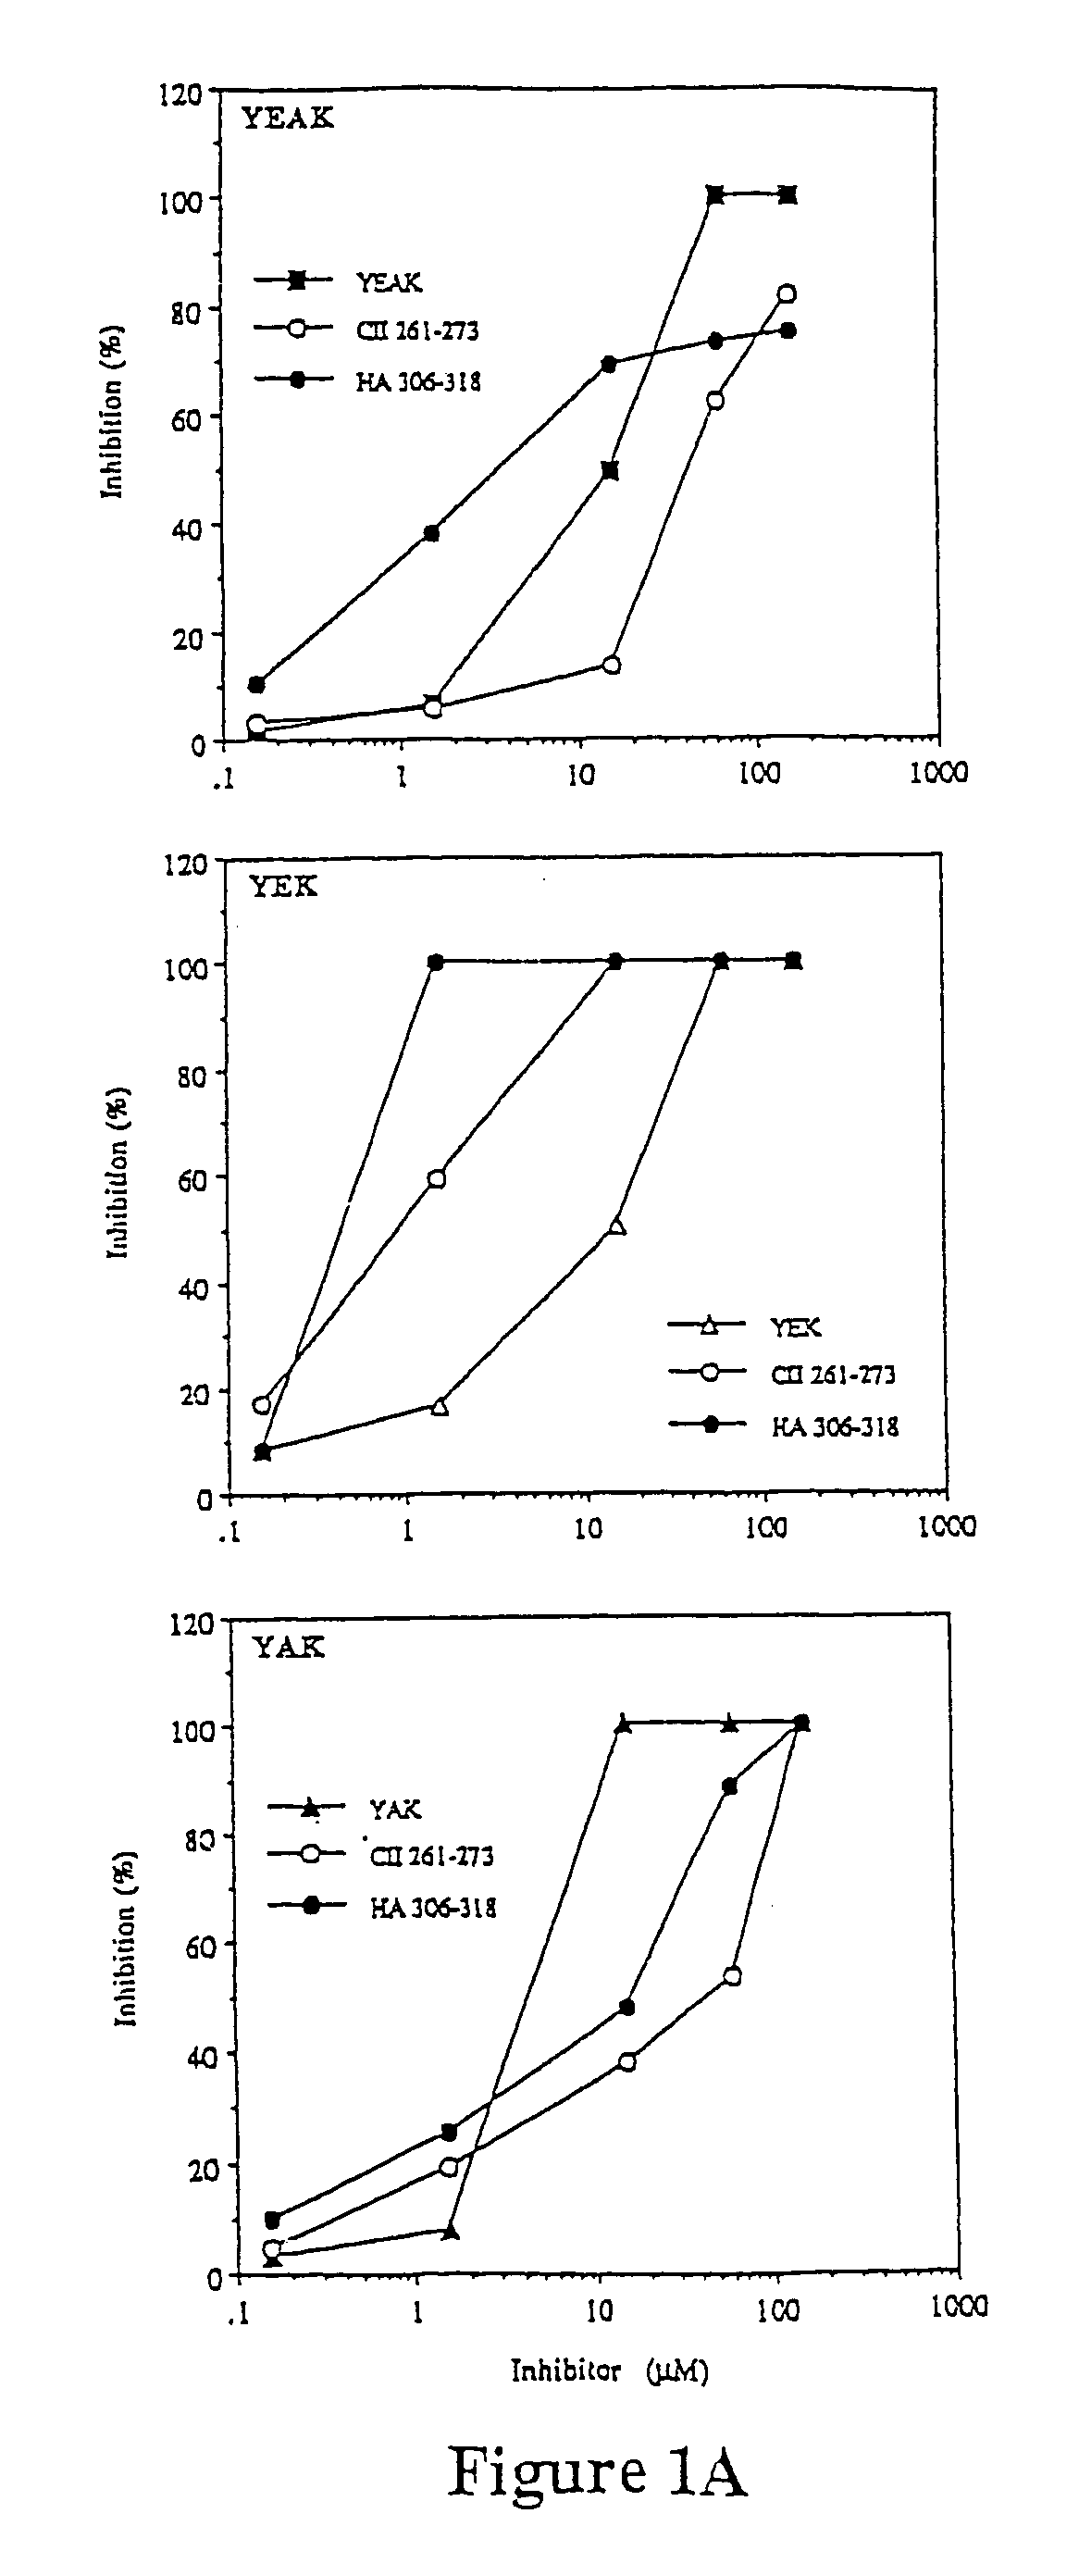 Treatment of autoimmune conditions with copolymer 1 and related copolymers